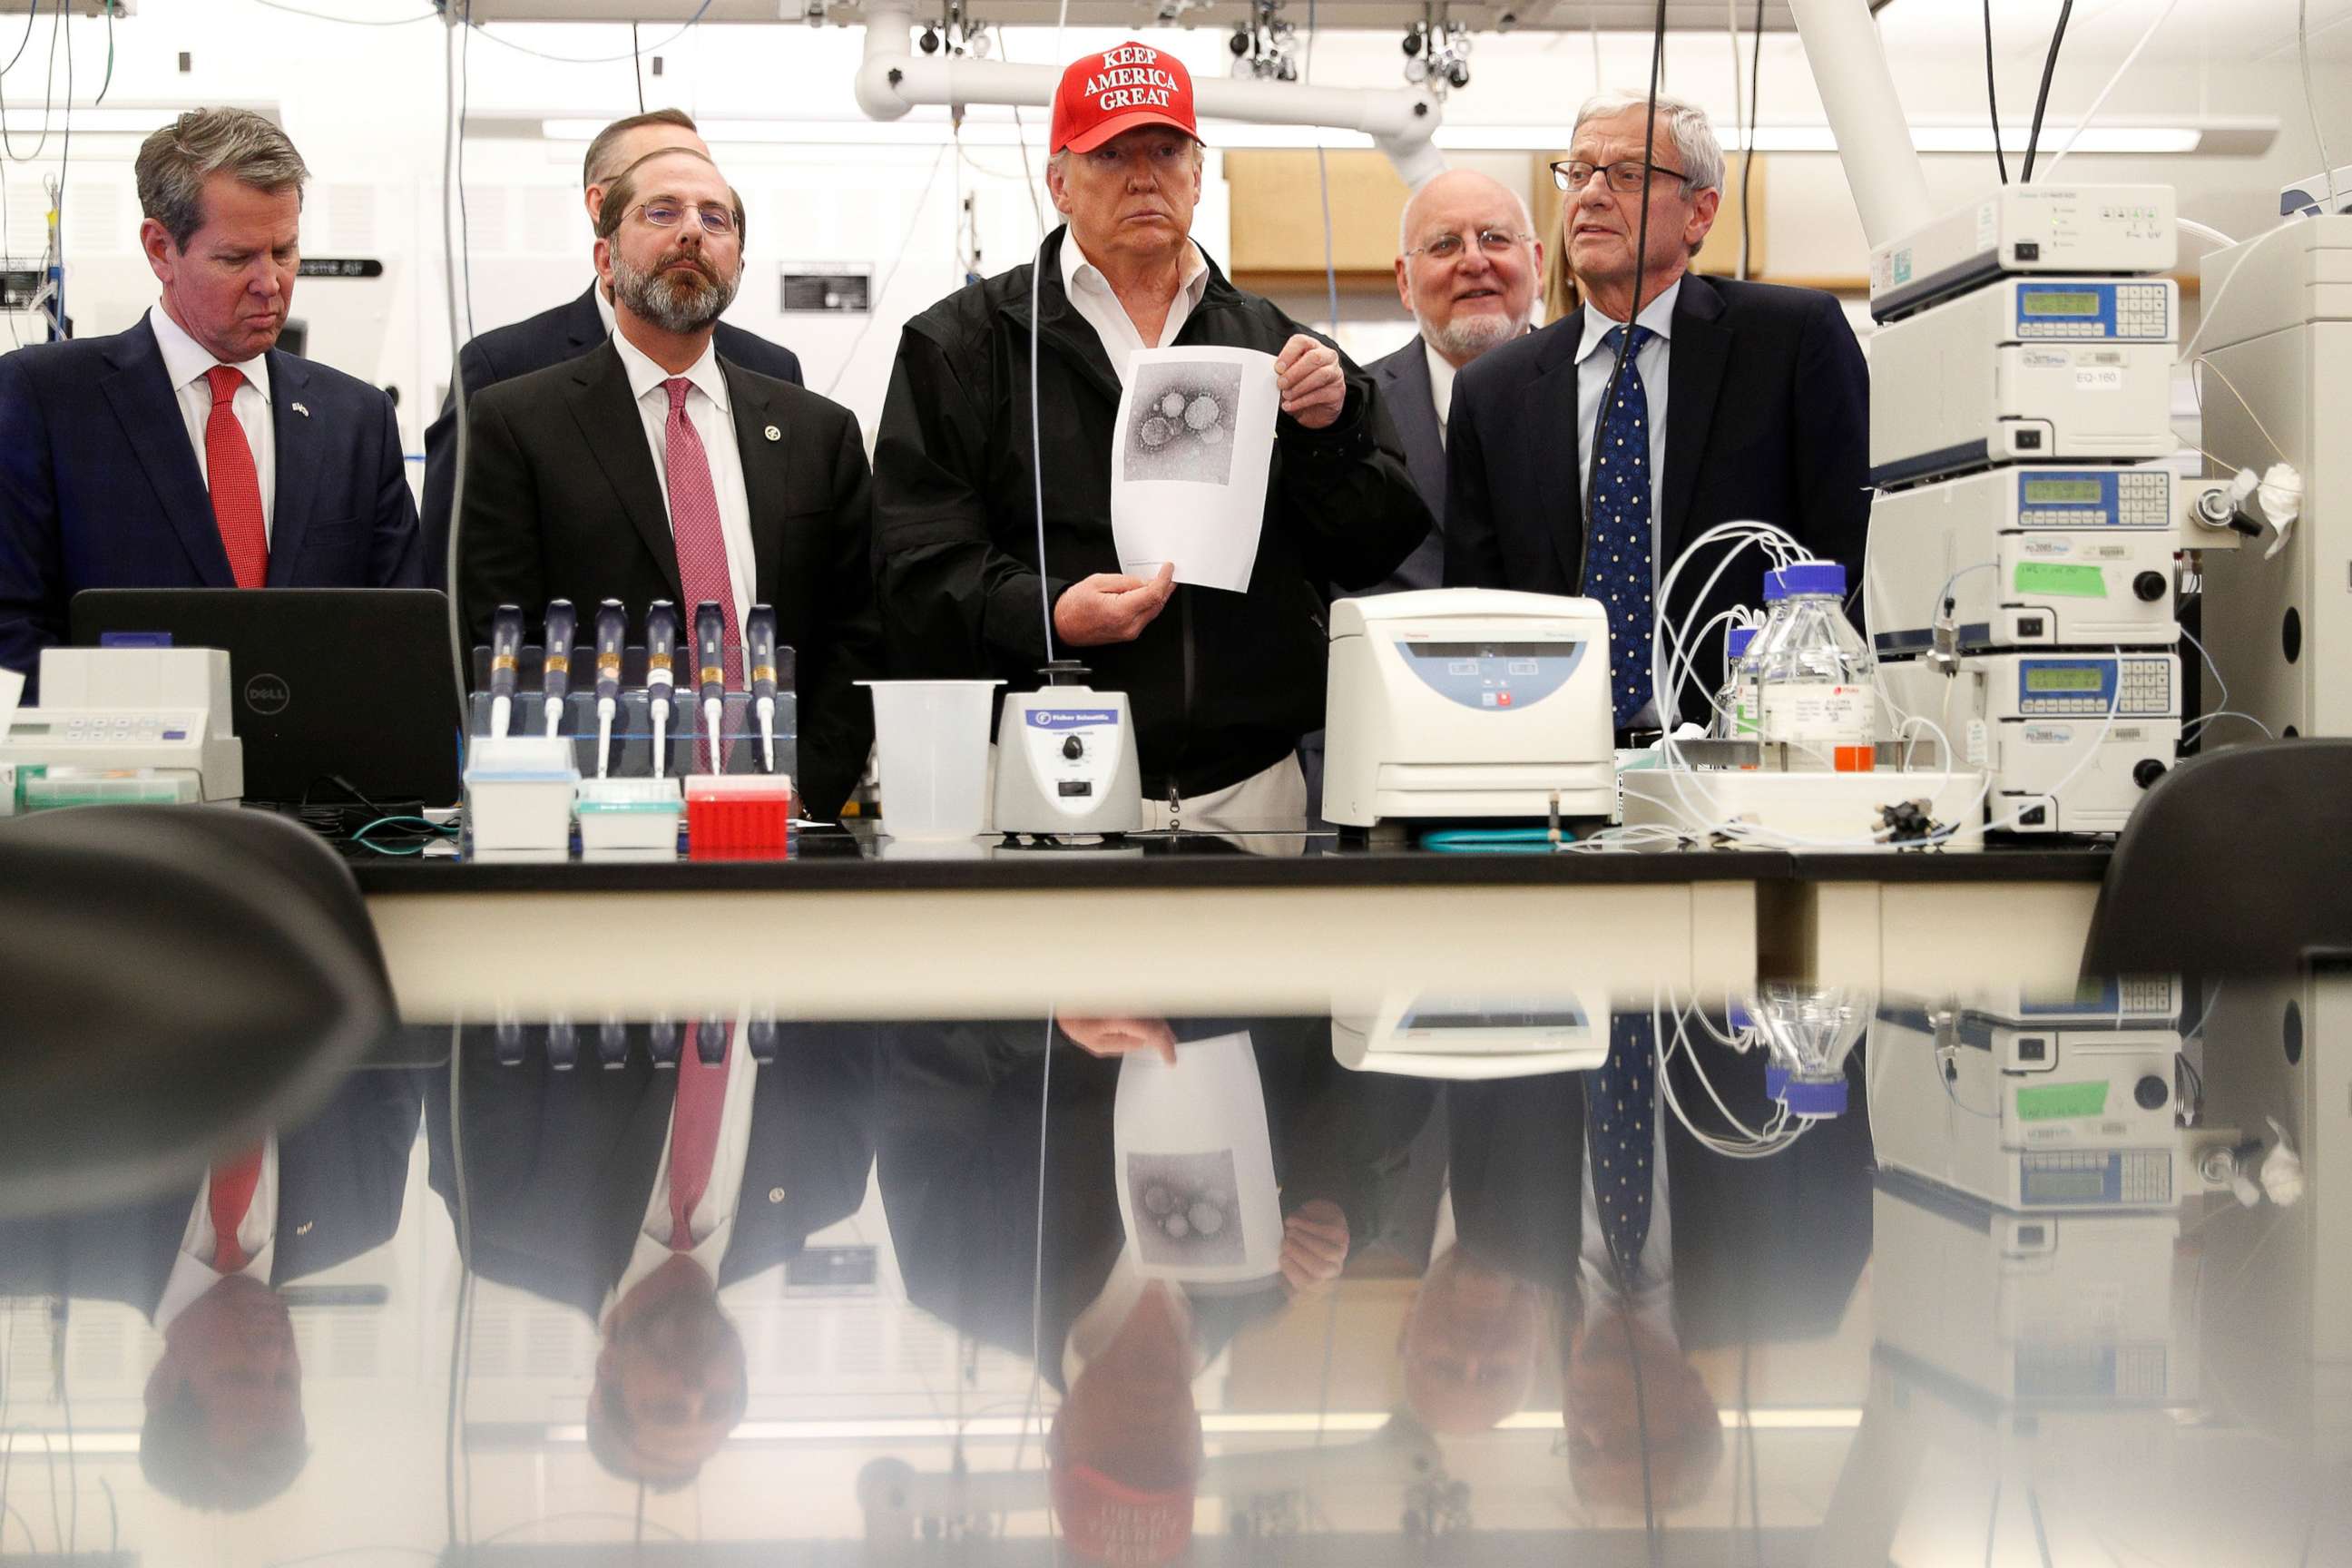 PHOTO: President Donald Trump displays a photo of COVID-19 beside Georgia Governor Brian Kemp, HHS Secretary Alex Azar and CDC Associate Director for Laboratory Science and Safety Steve Monroe, at the Center for Disease Control in Atlanta, March 6, 2020.